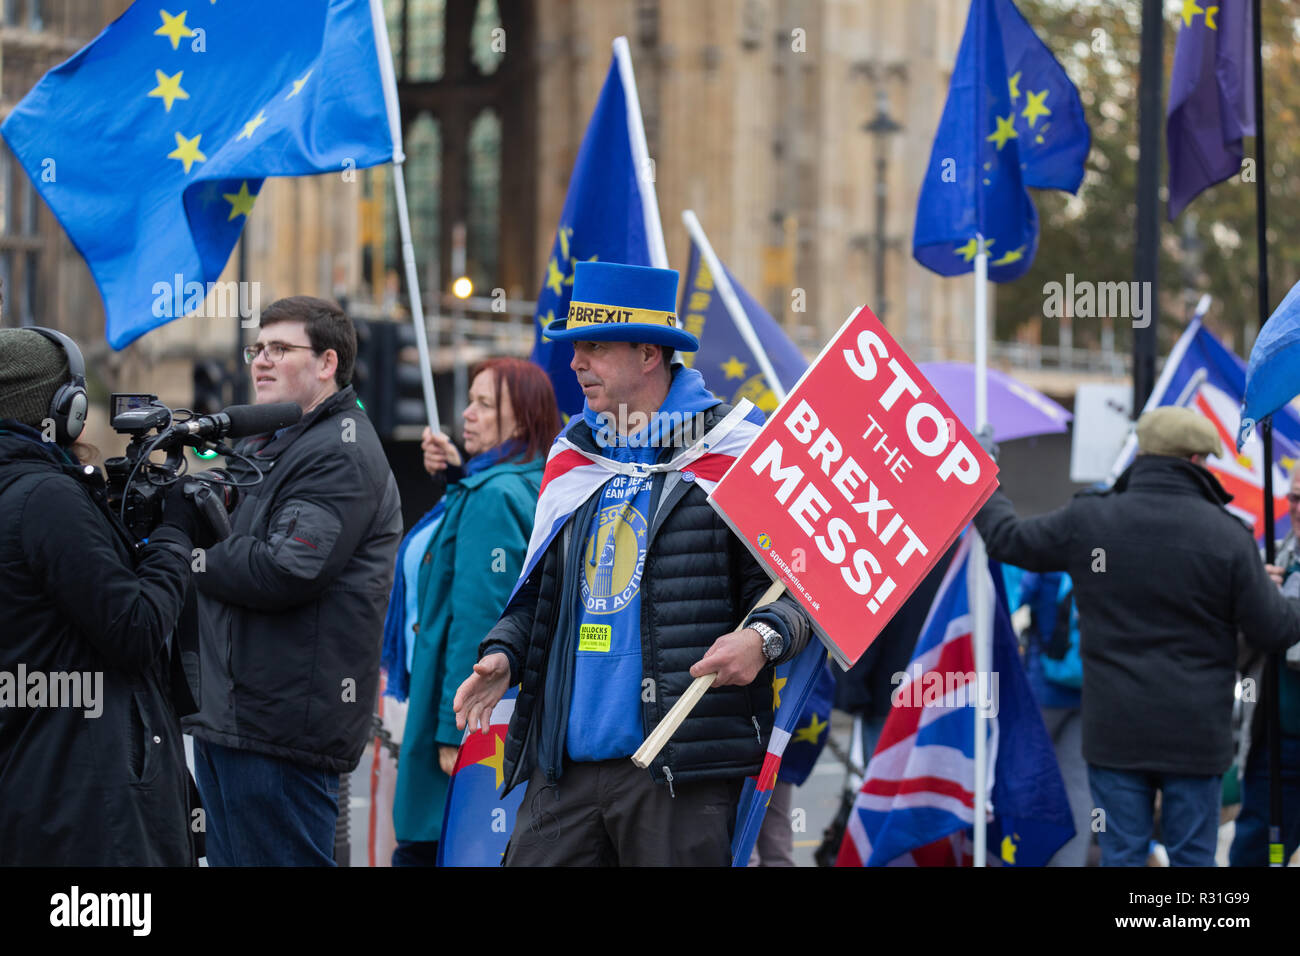 London, UK 21st November 2018. Stand of Defiance European Movement (SODEM) Brexit protest outside the Houses of Parliament in London. Credit: Andy Morton/Alamy Live News Stock Photo